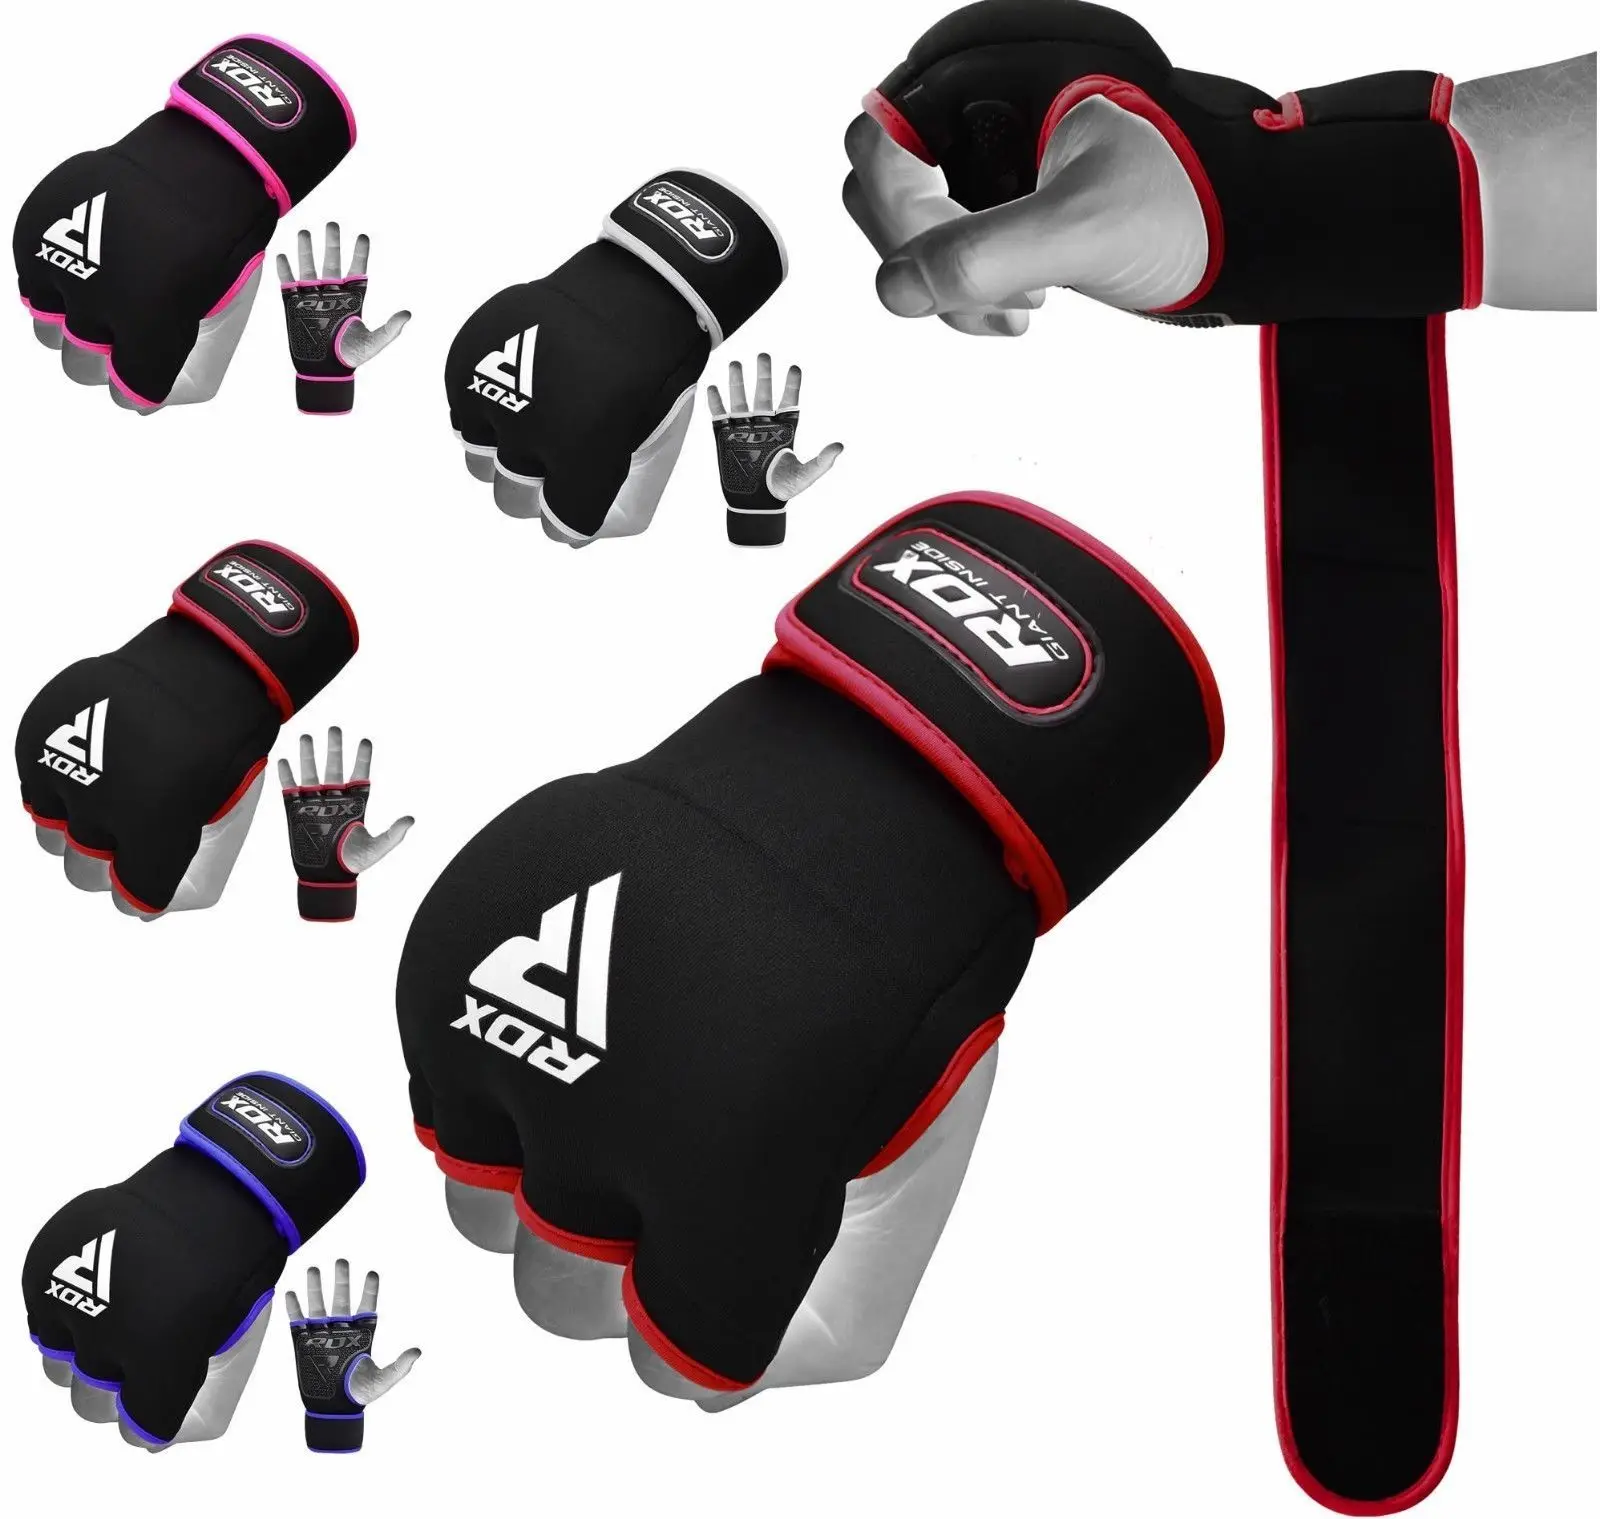 Gel Bandages MMA boxing INNER Quick Hand Wraps Gloves straps Quality stuff 